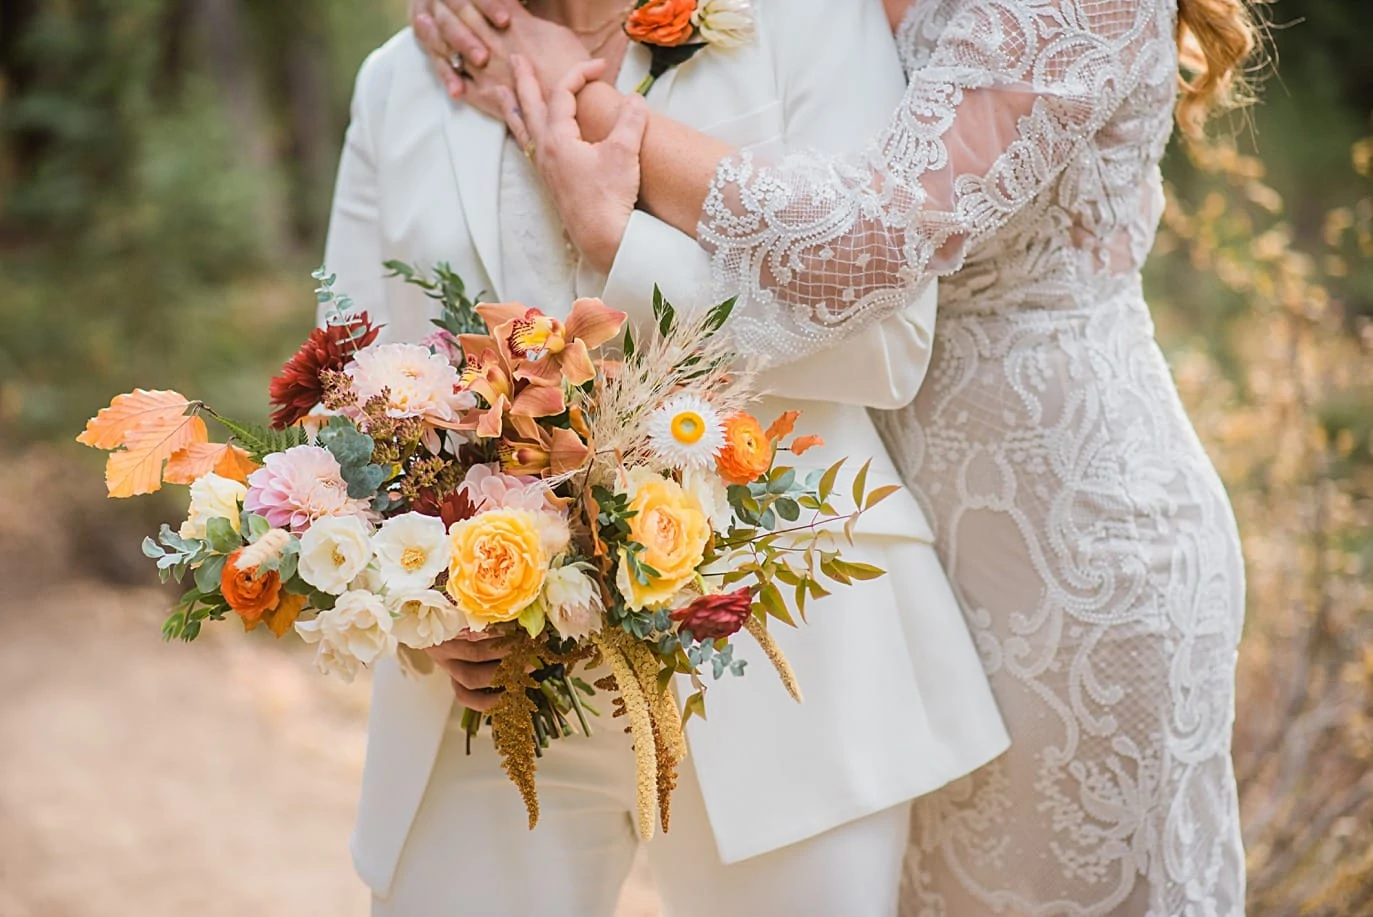 bride in dress with bride in suit and colorful bridal bouquet at Breckenridge microwedding by Colorado LGBT wedding photographer Jennie Crate